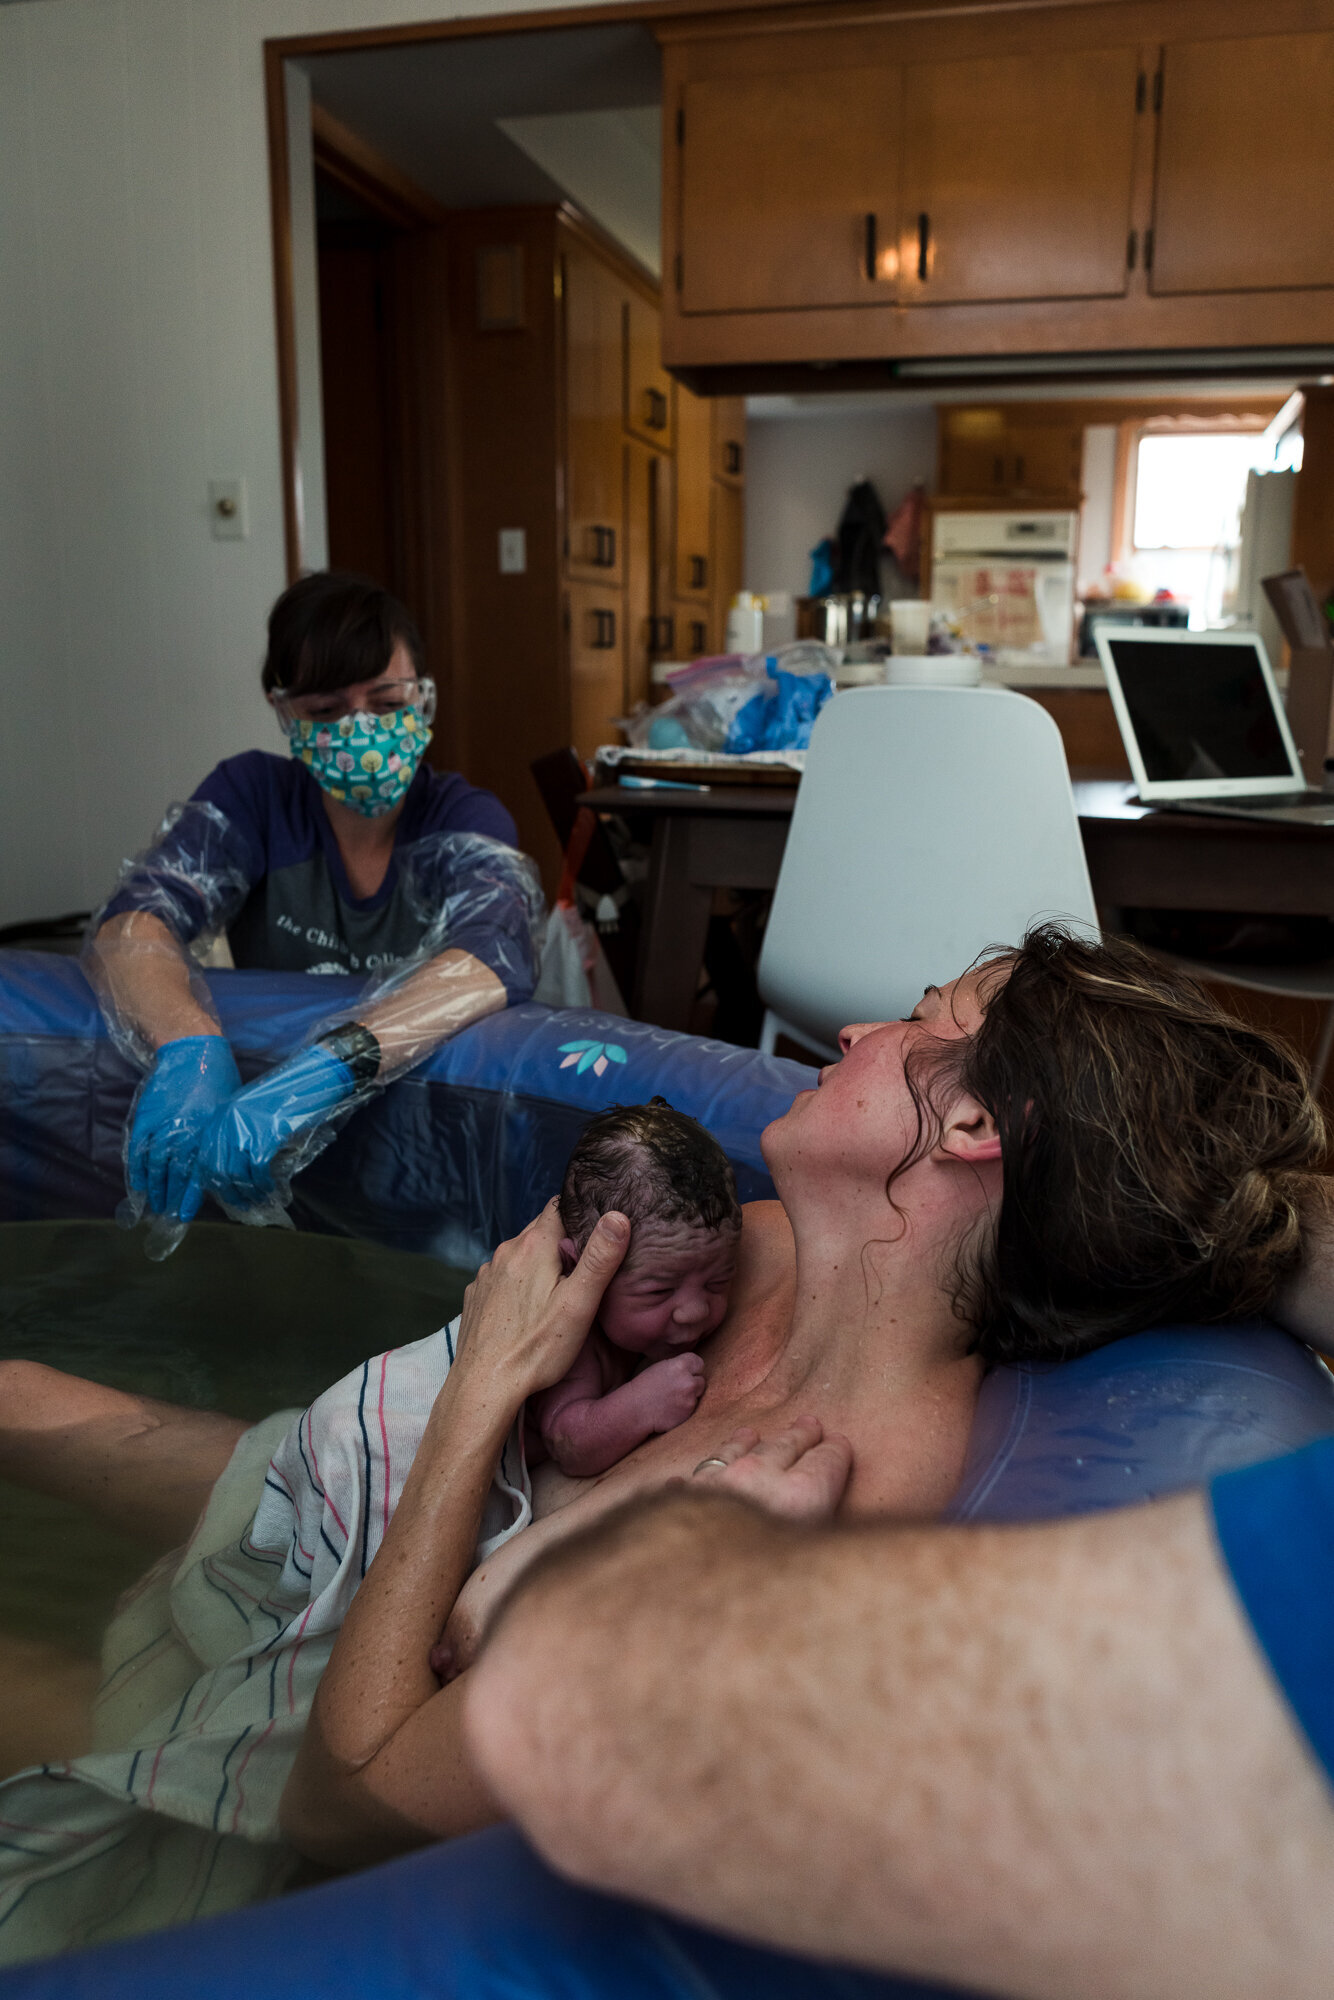 Gather+Birth+Cooperative-+Doula+Support+and+Birth+Photography+in+Minneapolis+-+April+15,+2020+-+150701.jpg